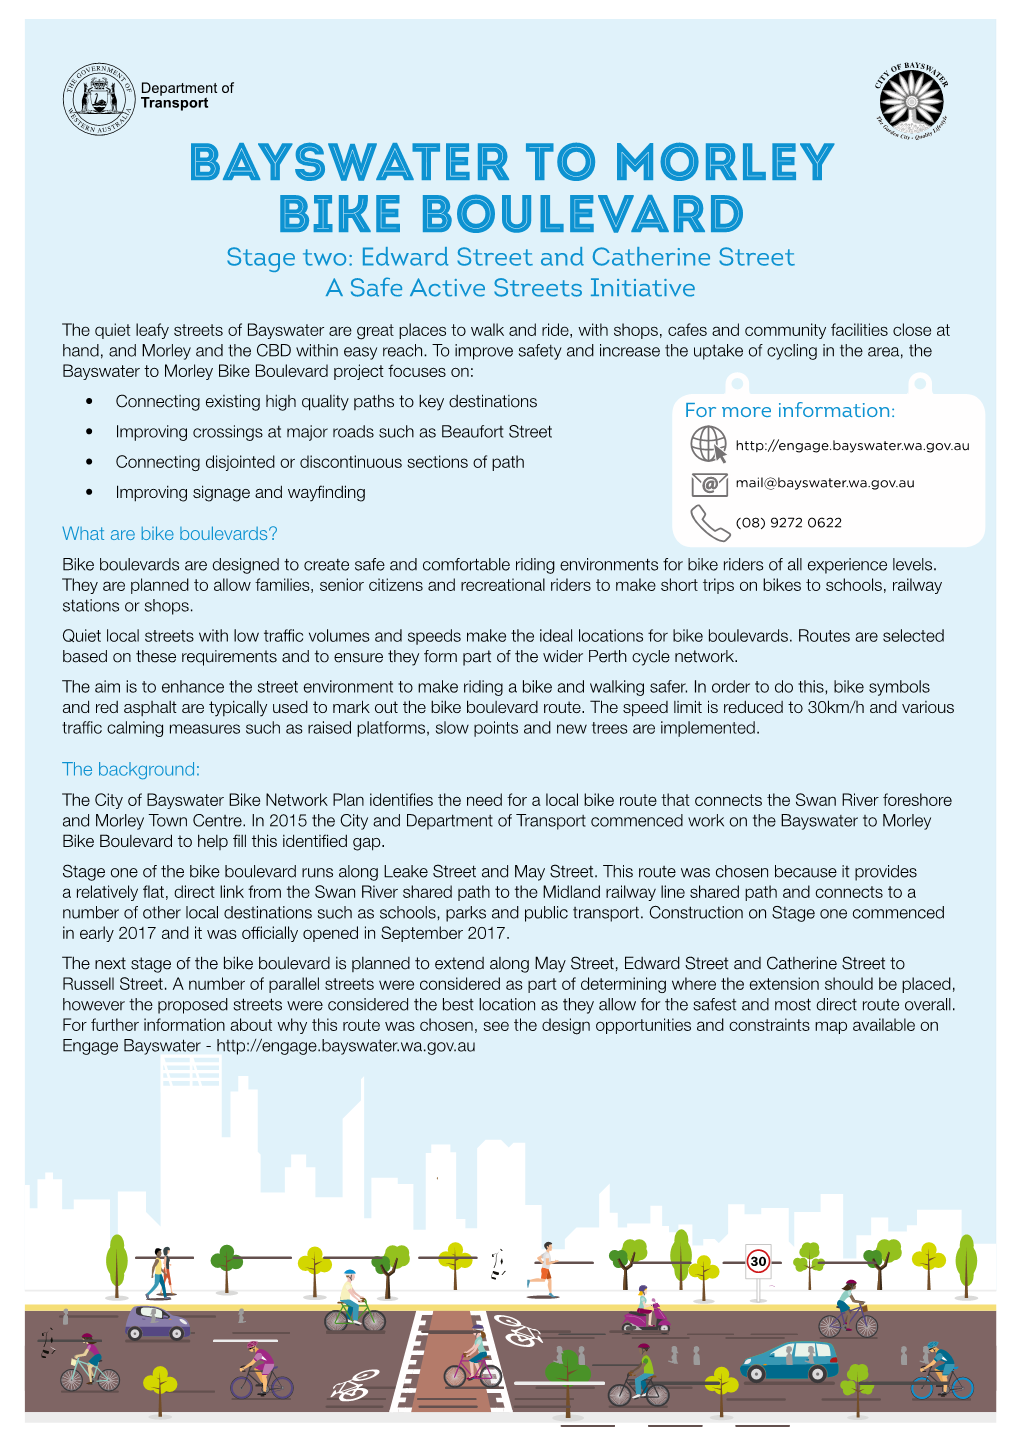 BAYSWATER to MORLEY BIKE BOULEVARD Stage Two: Edward Street and Catherine Street a Safe Active Streets Initiative